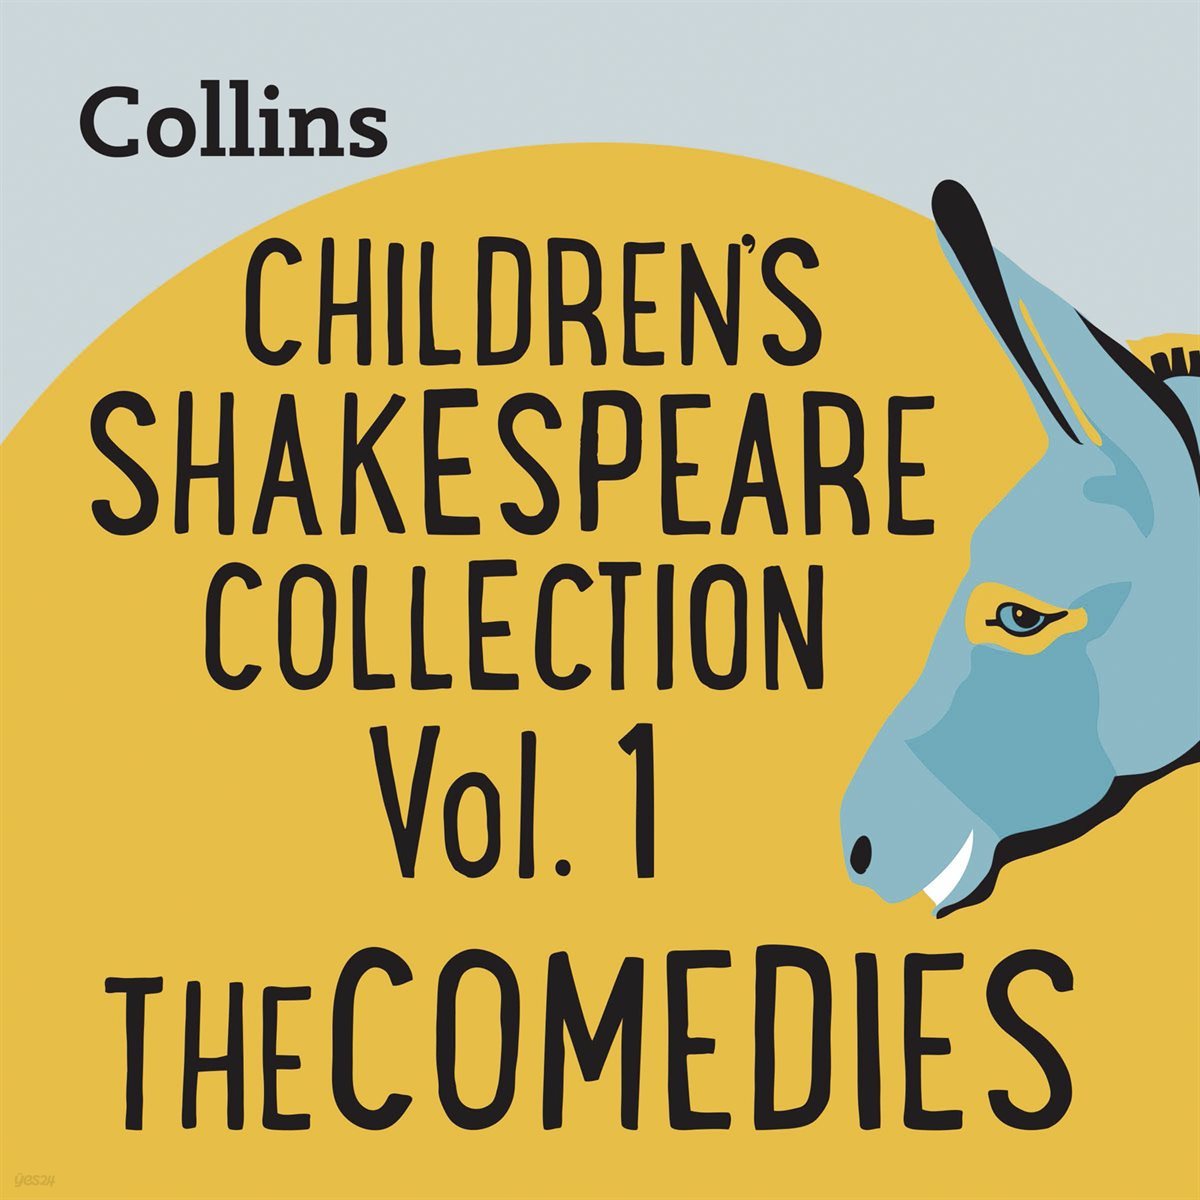 [US Eng] CHILDREN’S SHAKESPEARE COLLECTION VOL.1: THE COMEDIES: For ages 7 - 11 -Collins